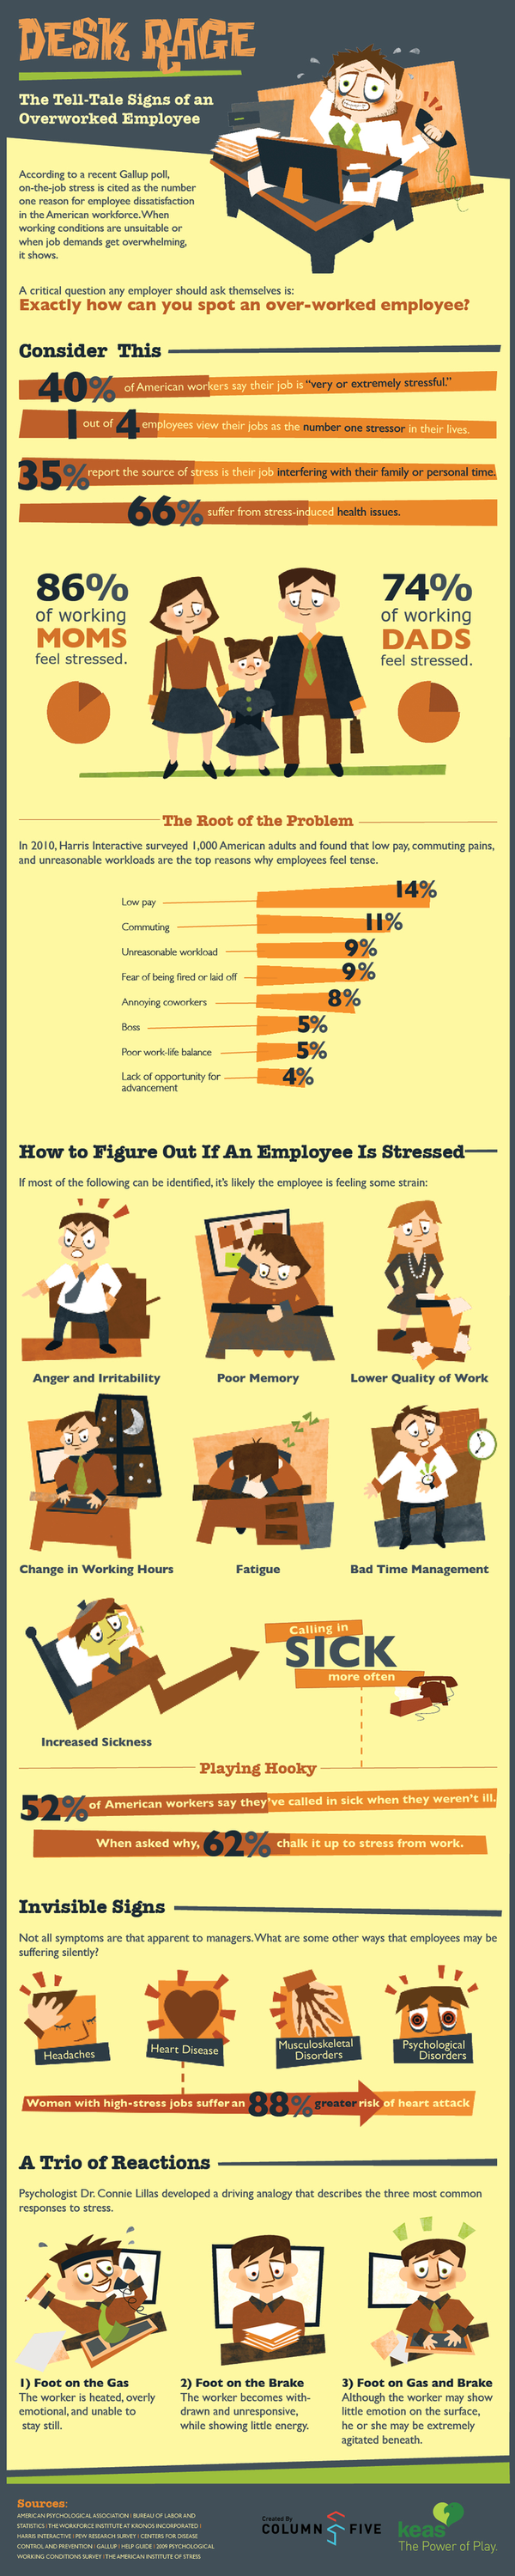 Overworked Employees: Signs a